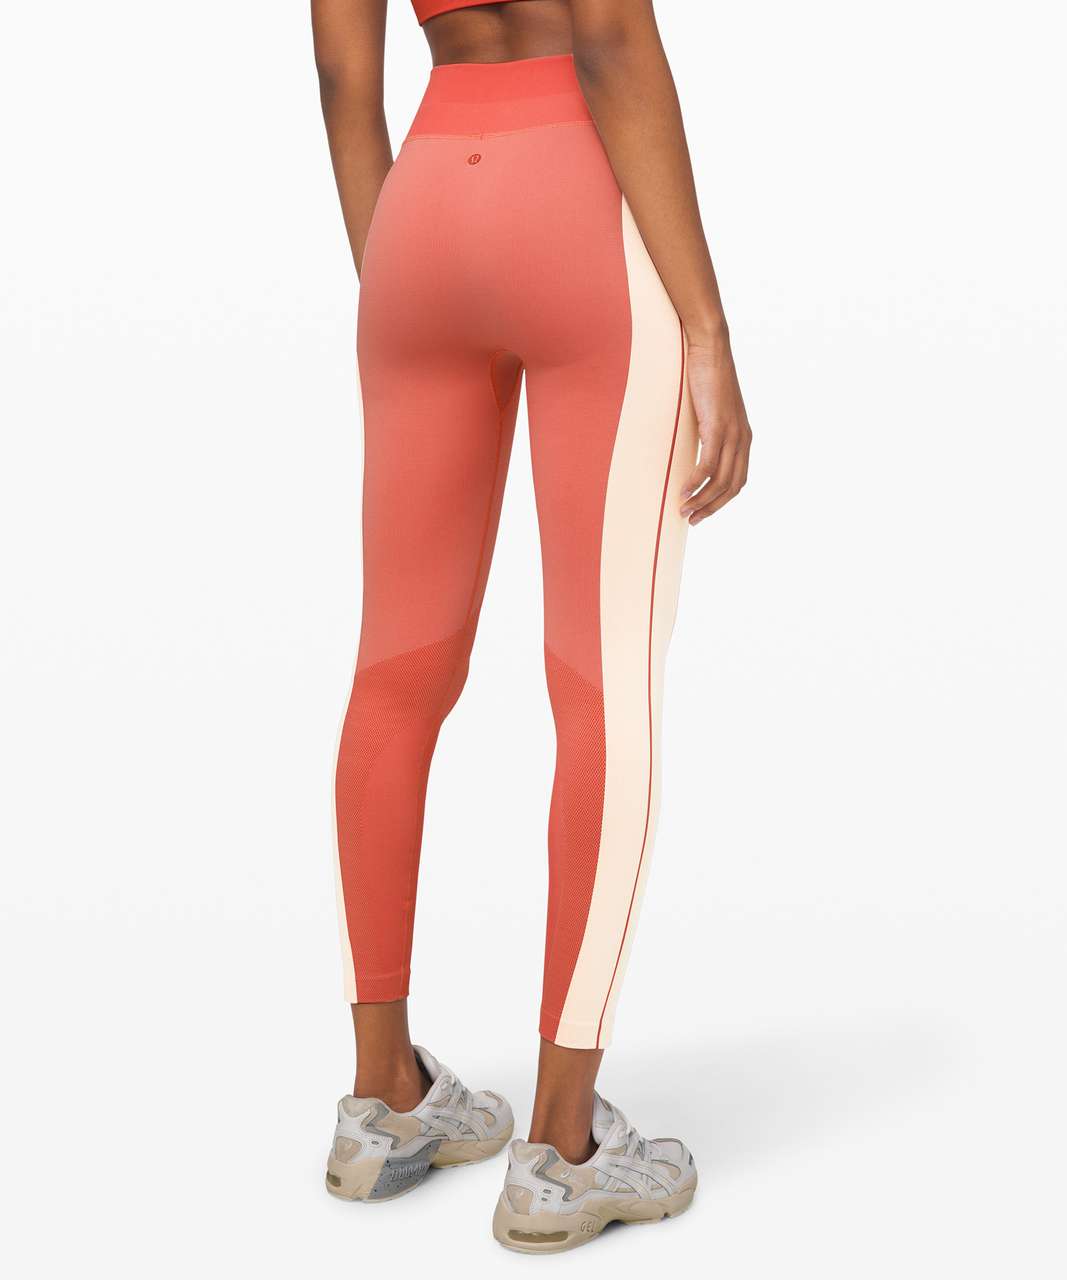 LULULEMON EBB TO TRAIN TIGHT 2 COPPER CLAY ANGEL WING SEAMLESS